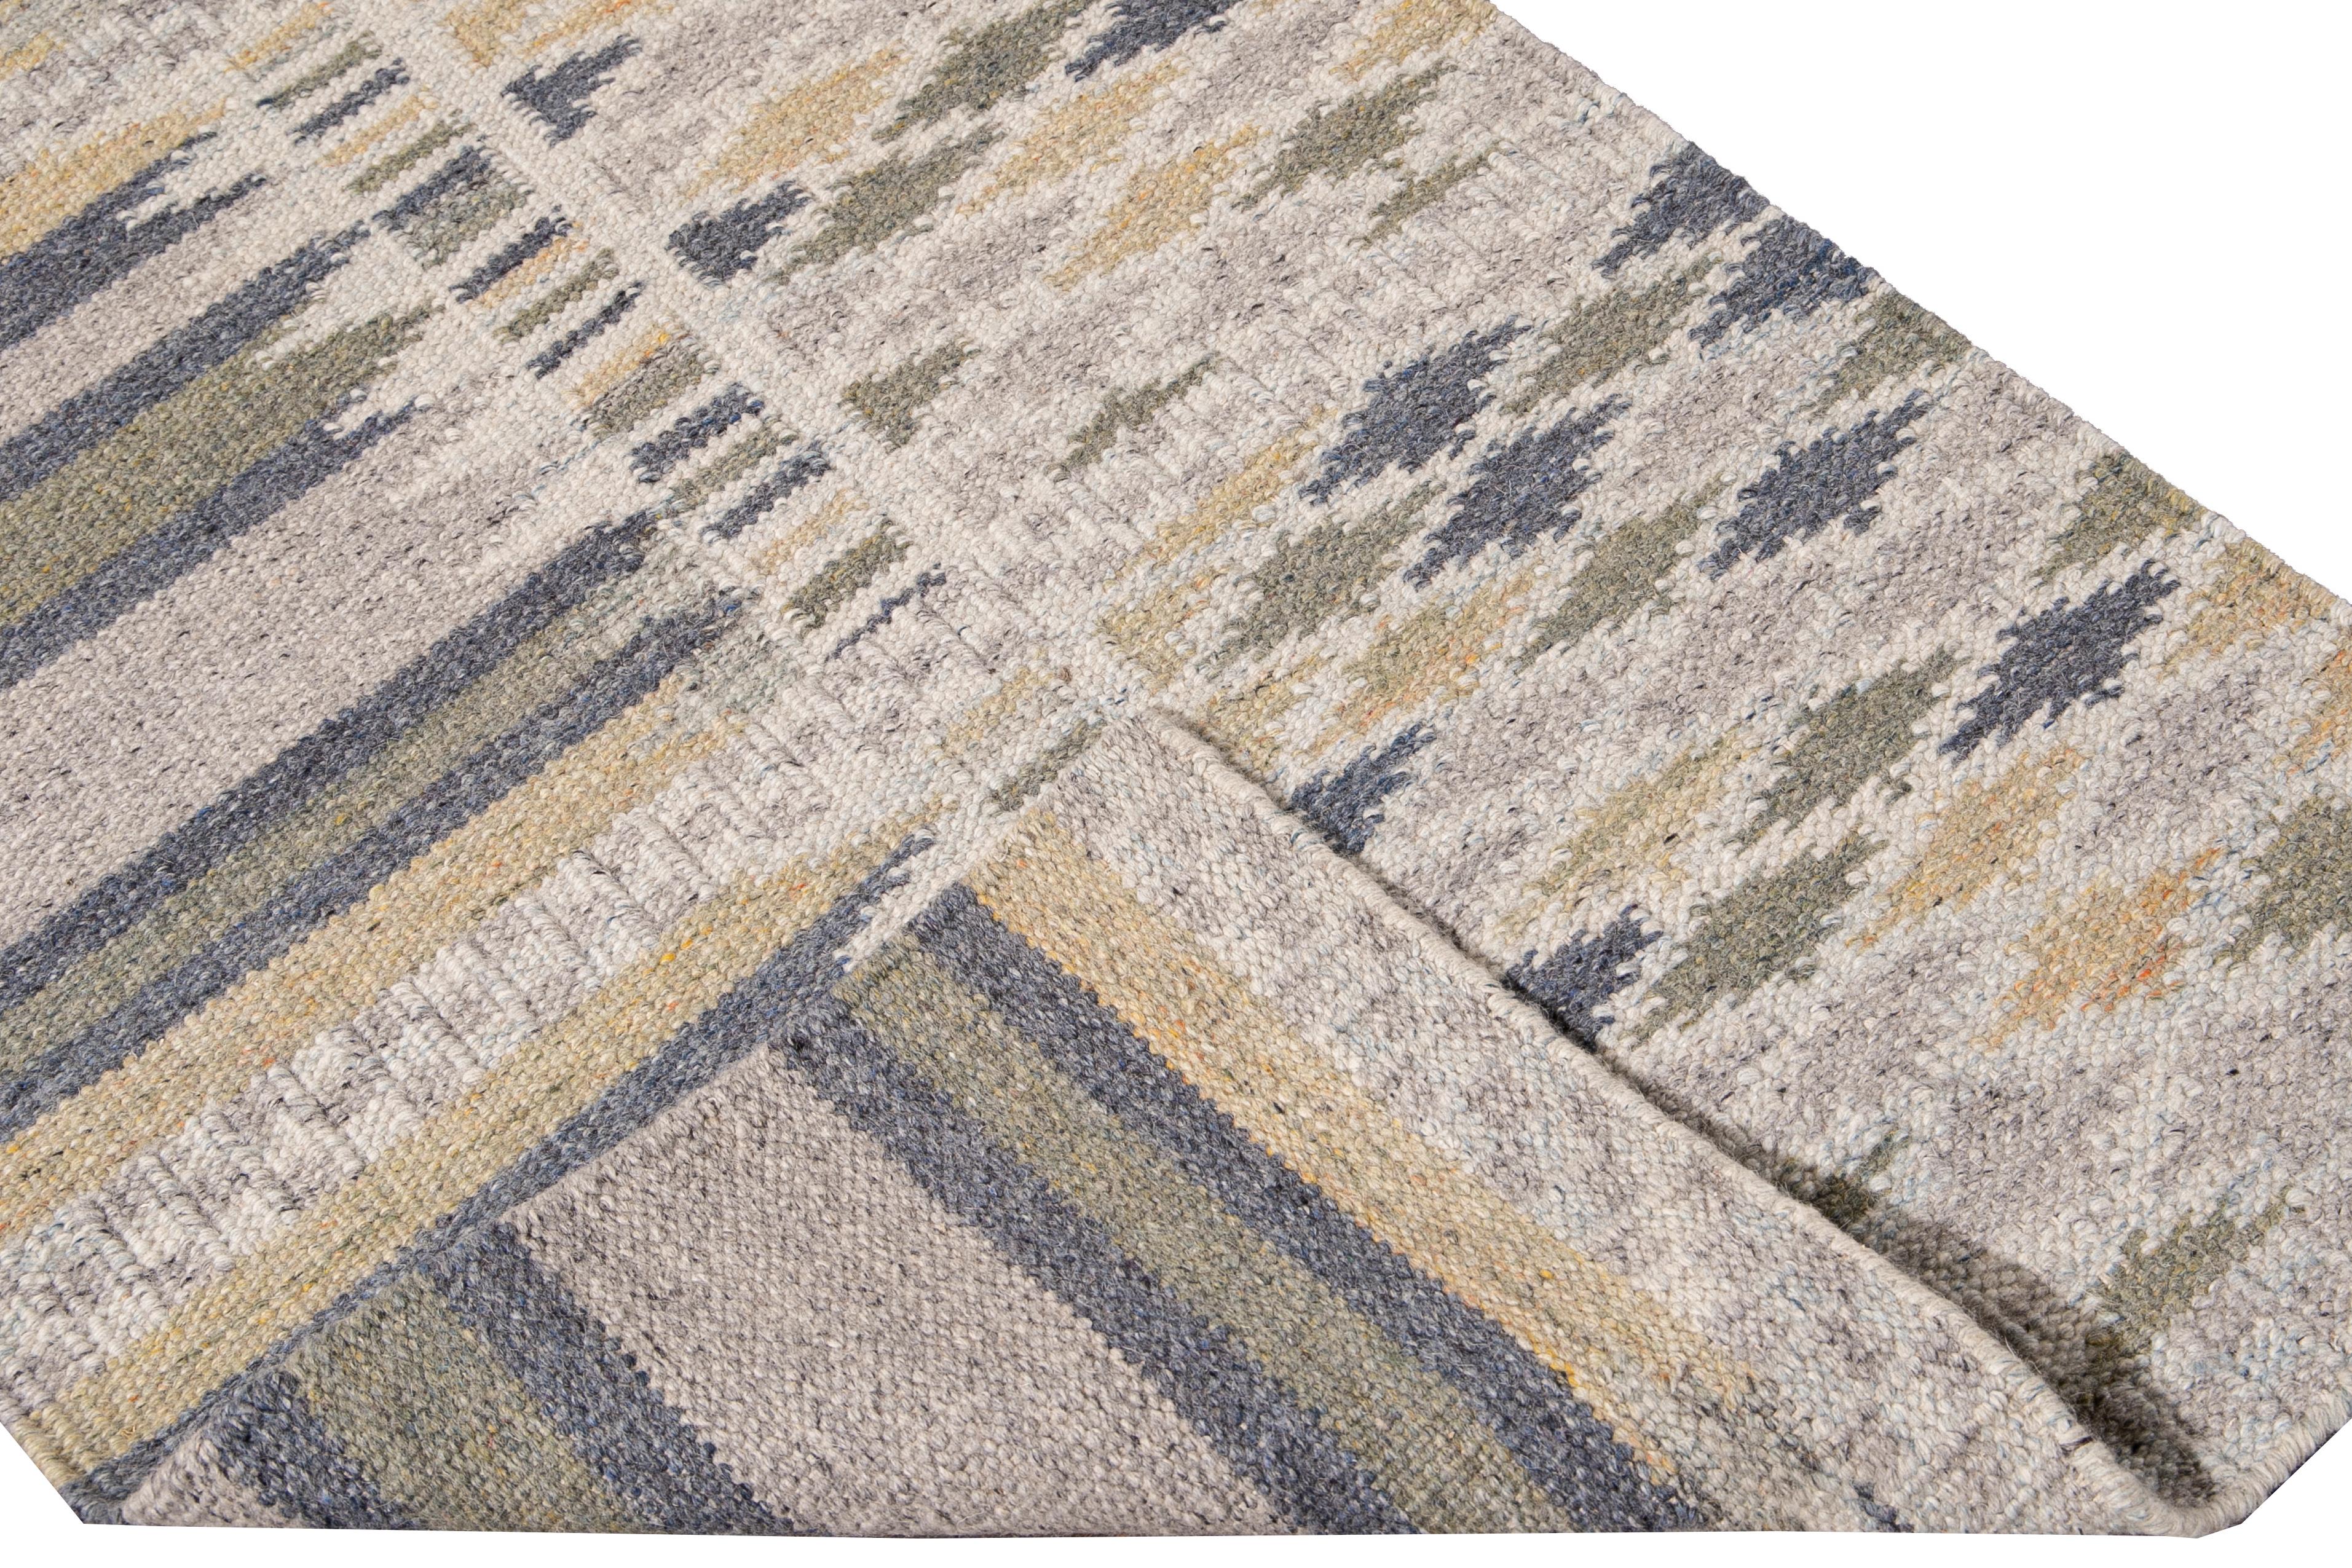 Beautiful modern Swedish hand-knotted wool runner with a beige field. This Swedish runner has accents of blue, green, and yellow in an all-over geometric abstract design.

This rug measures: 3'3